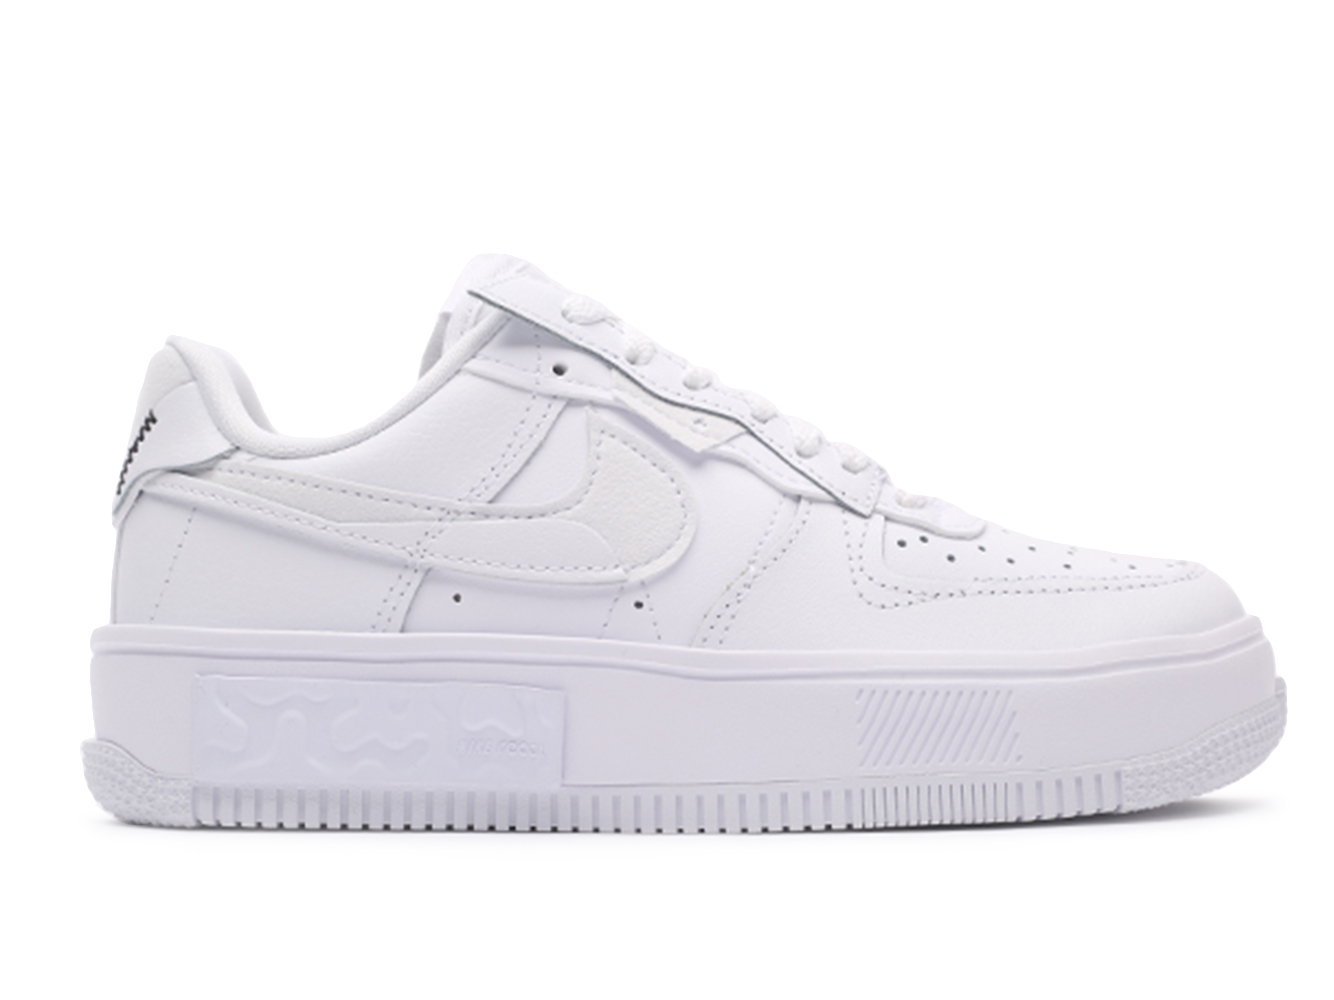 nike triple white with printed swoosh air force